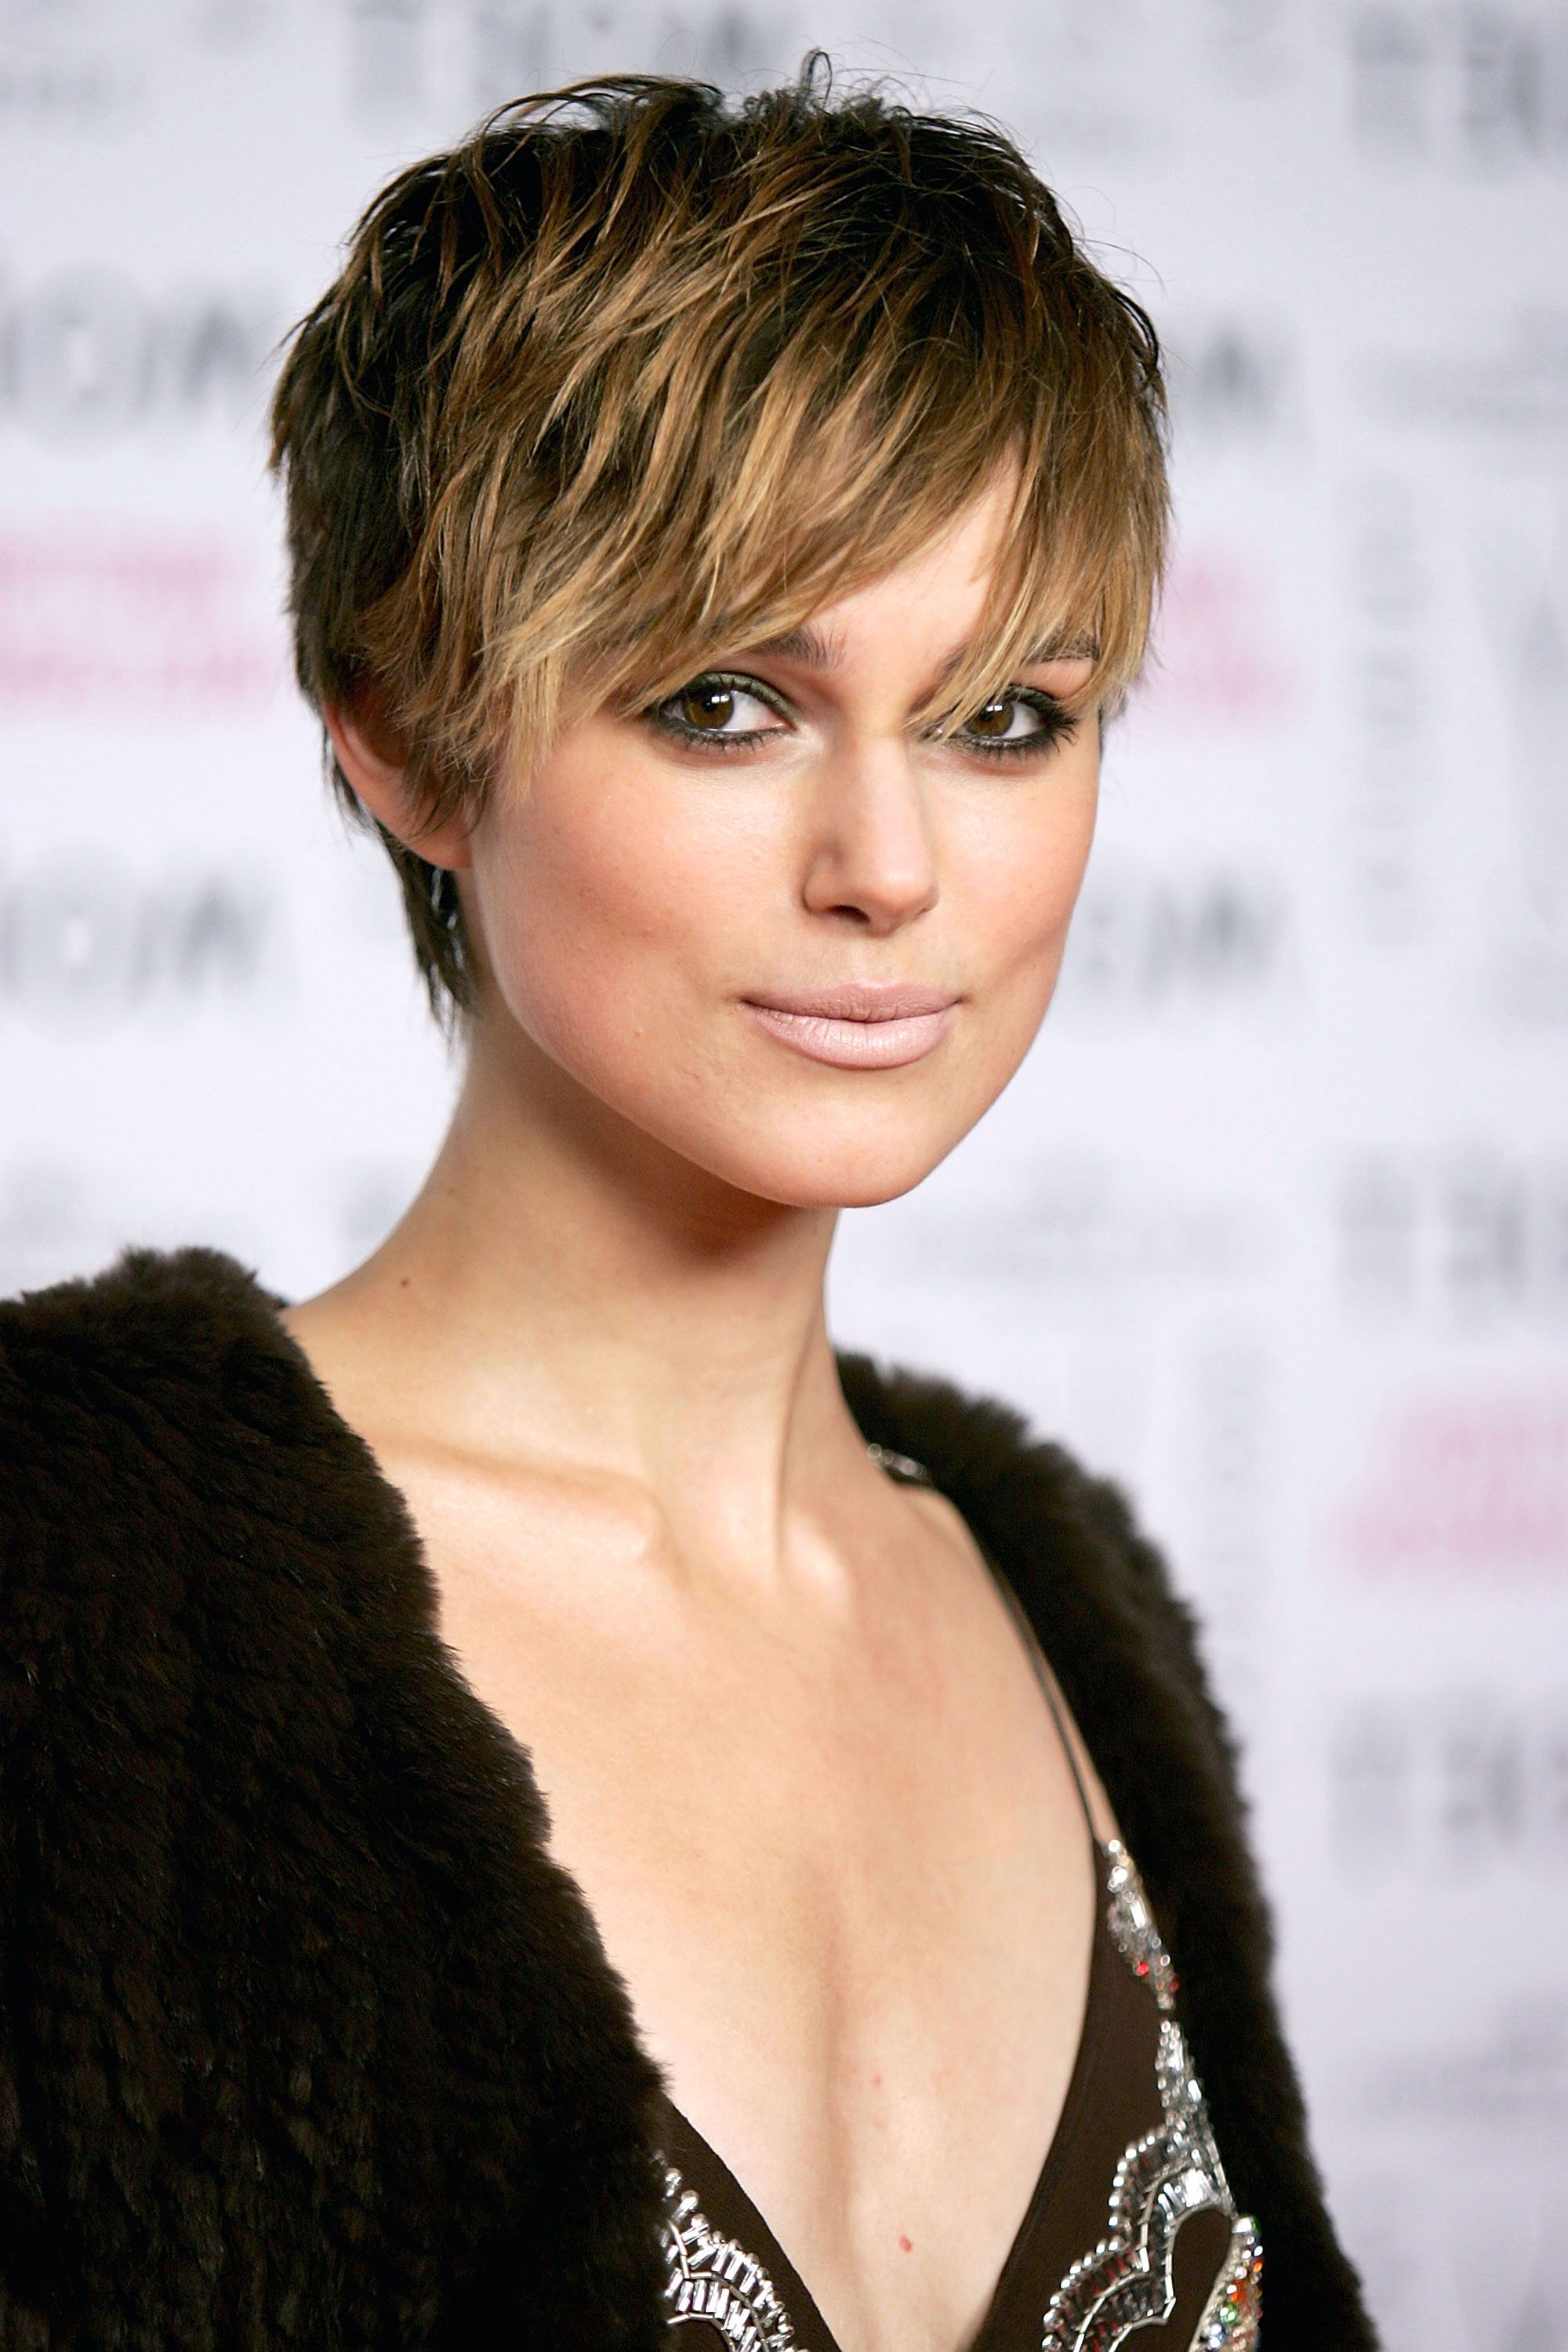 50+ Pixie Cuts We Love For 2018 – Short Pixie Hairstyles From With Short Haircuts With Bangs For Round Faces (View 22 of 25)